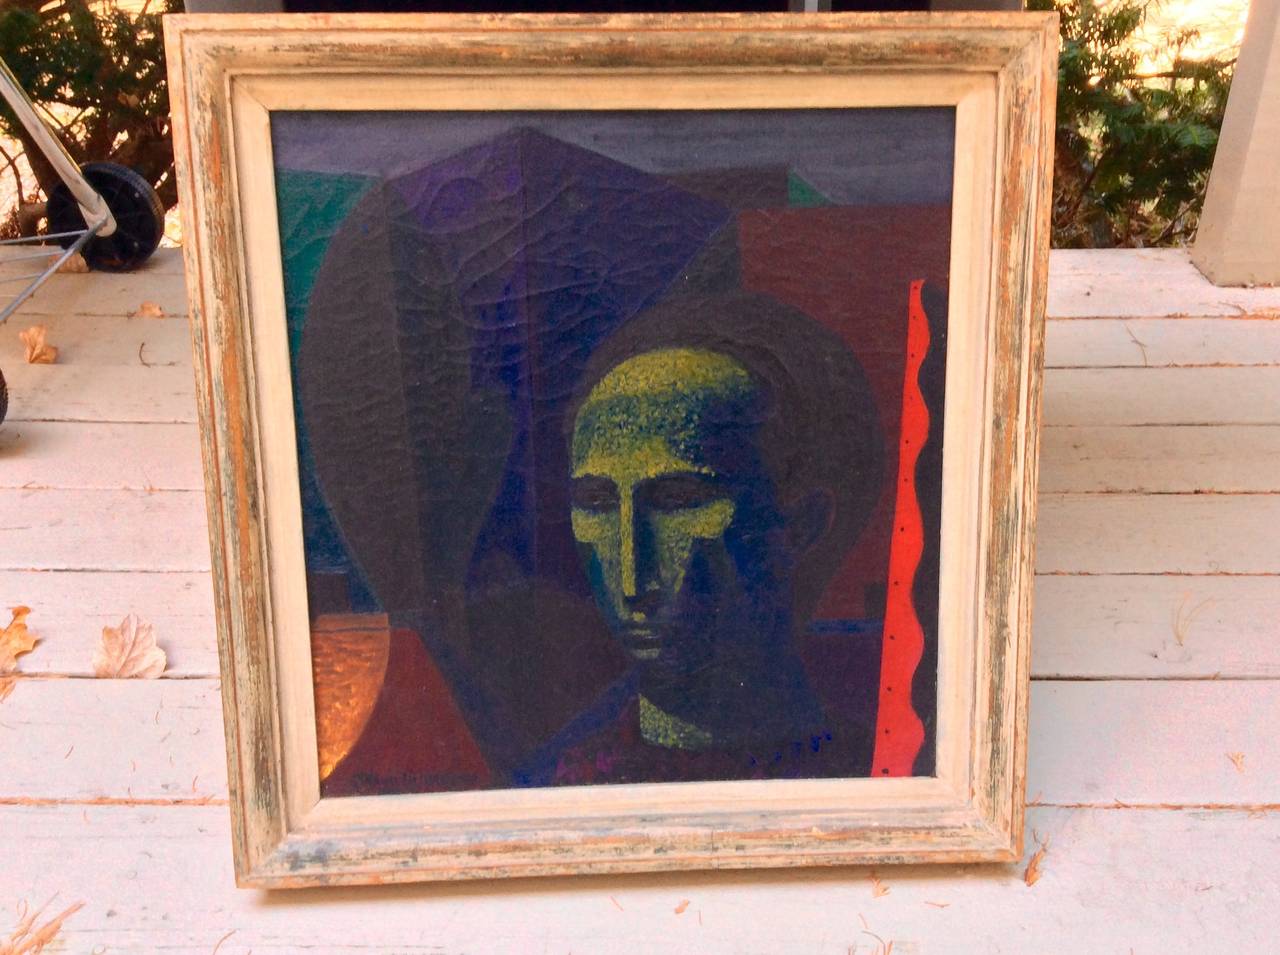 A wonderful oil on canvas by the noted ny artist Stefano Cusumano (1912-1975).  It is signed along the base. 
A biography from askart follows
Stefano Cusumano (1912-1975) was an emerging painter in the first part of the 20th century at a time when